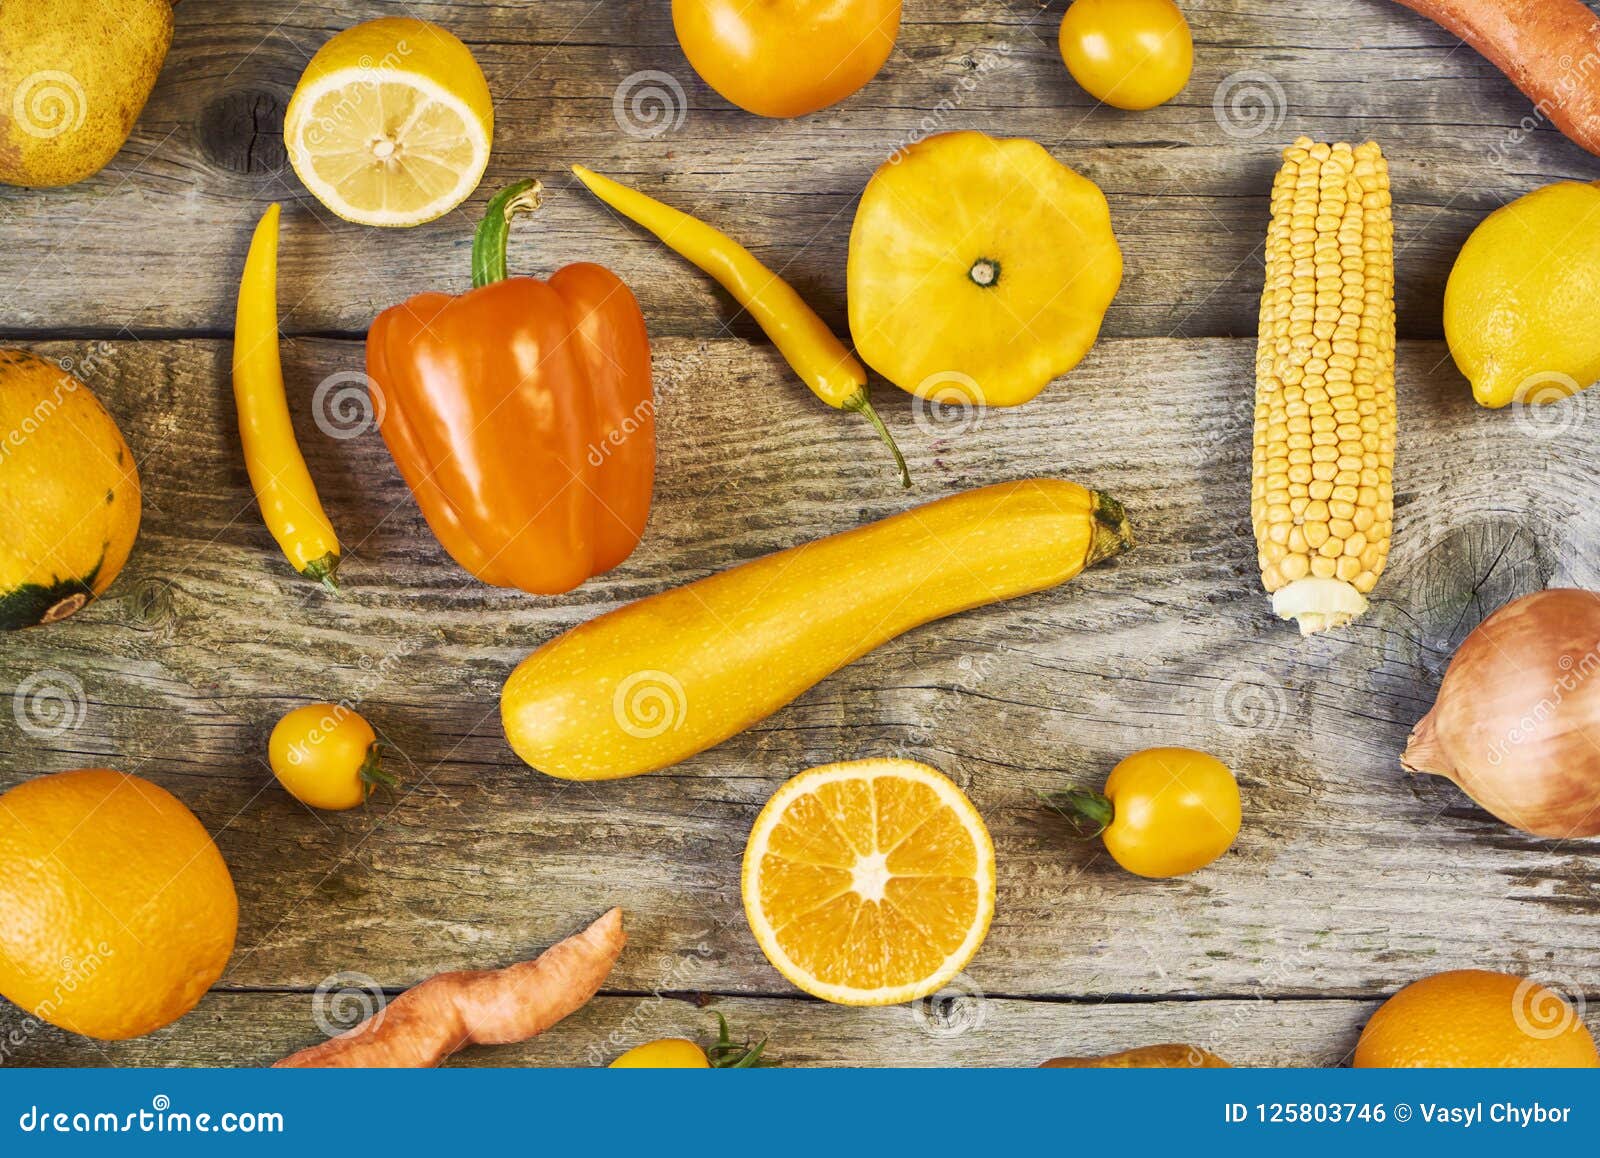 Assorted Types Of Yellow Fruits And Vegetables On Wooden Background ...